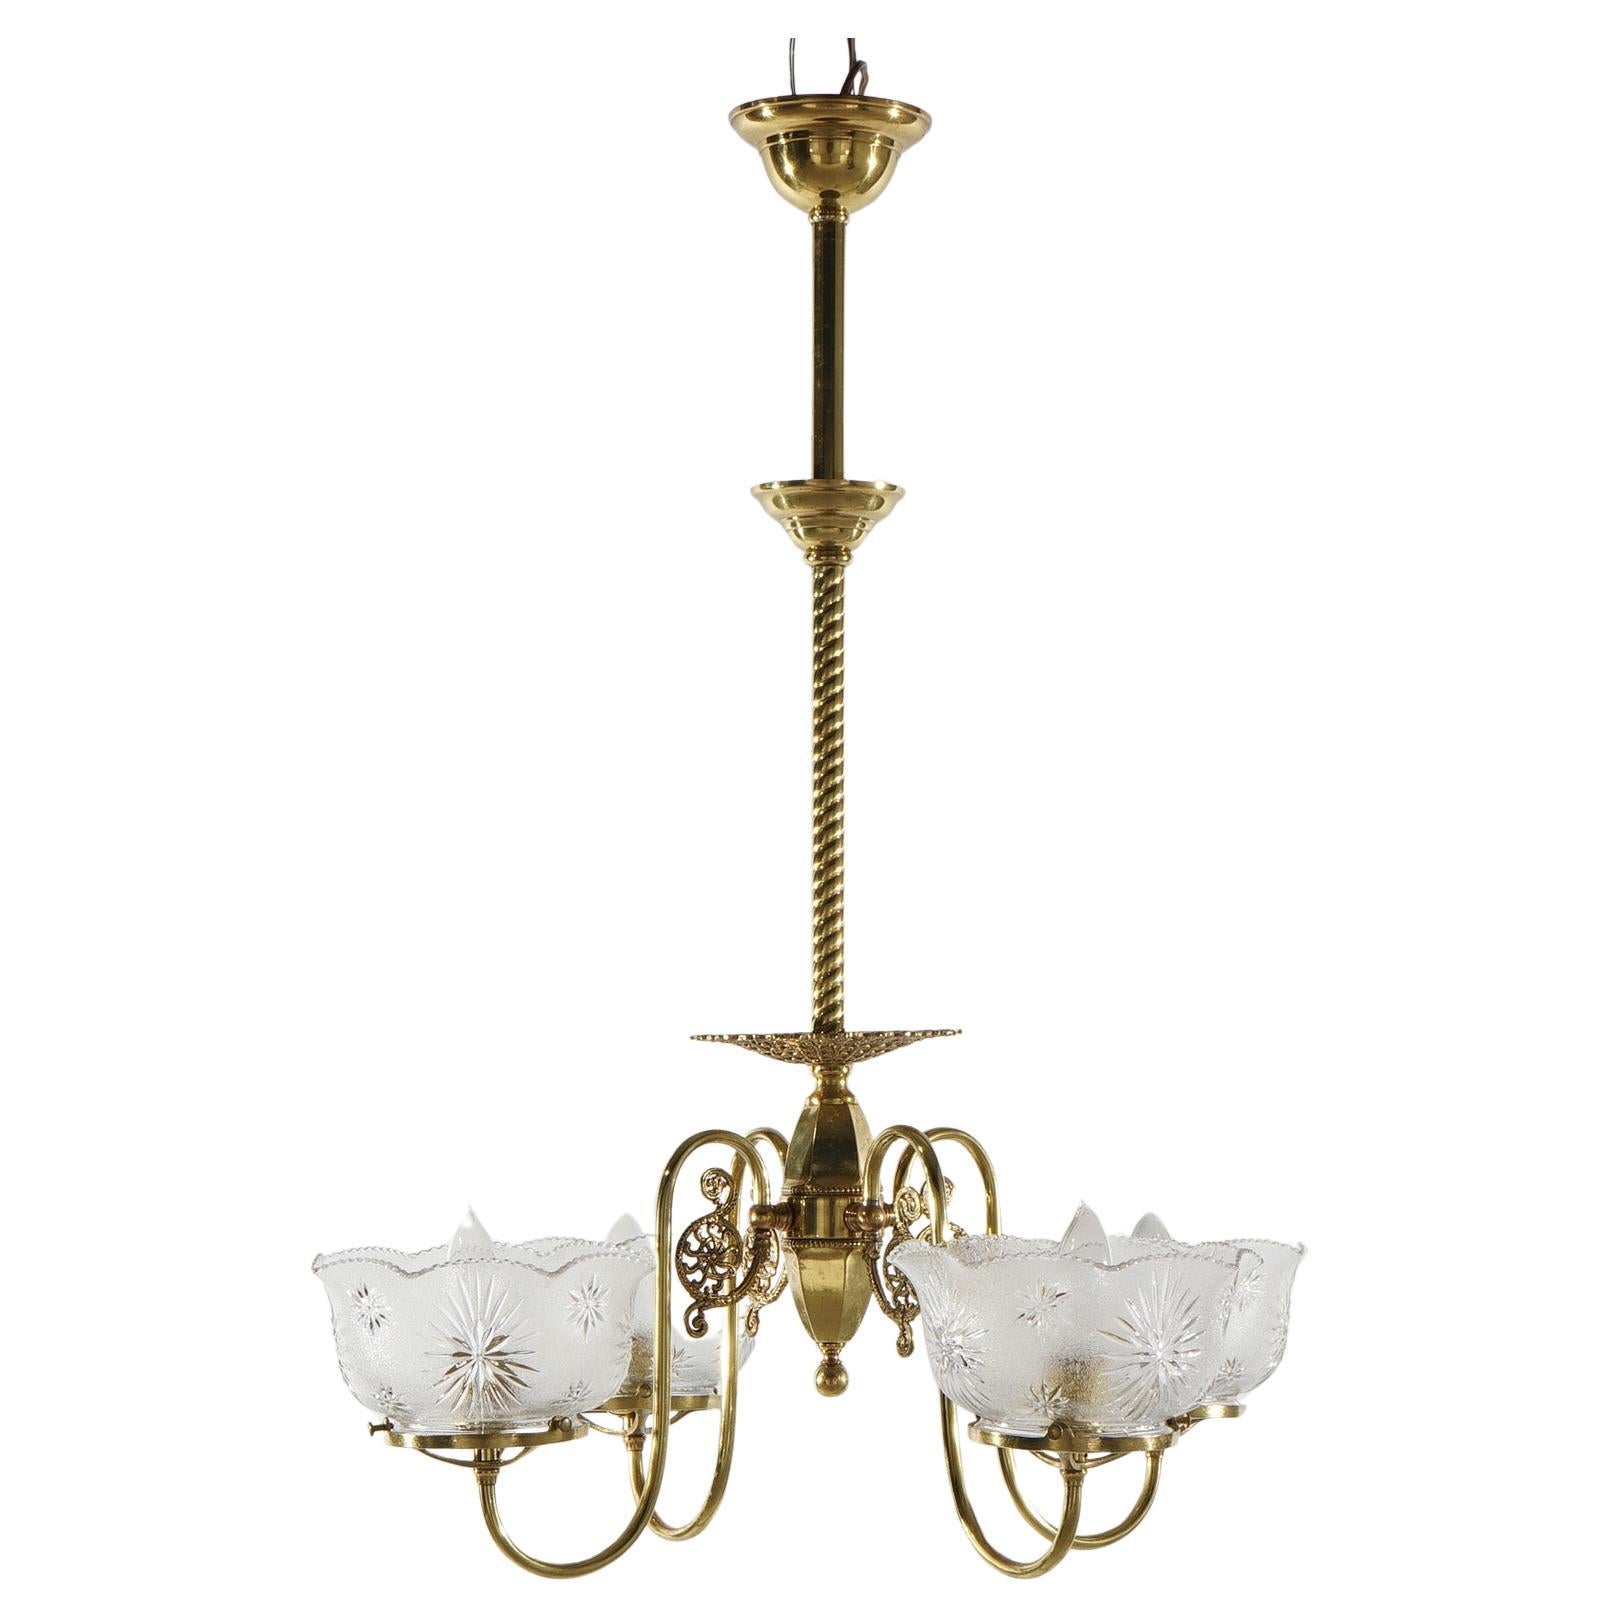 Antique Brass Four-Arm Gas Light Hanging Fixture with Glass Shades C1880 For Sale